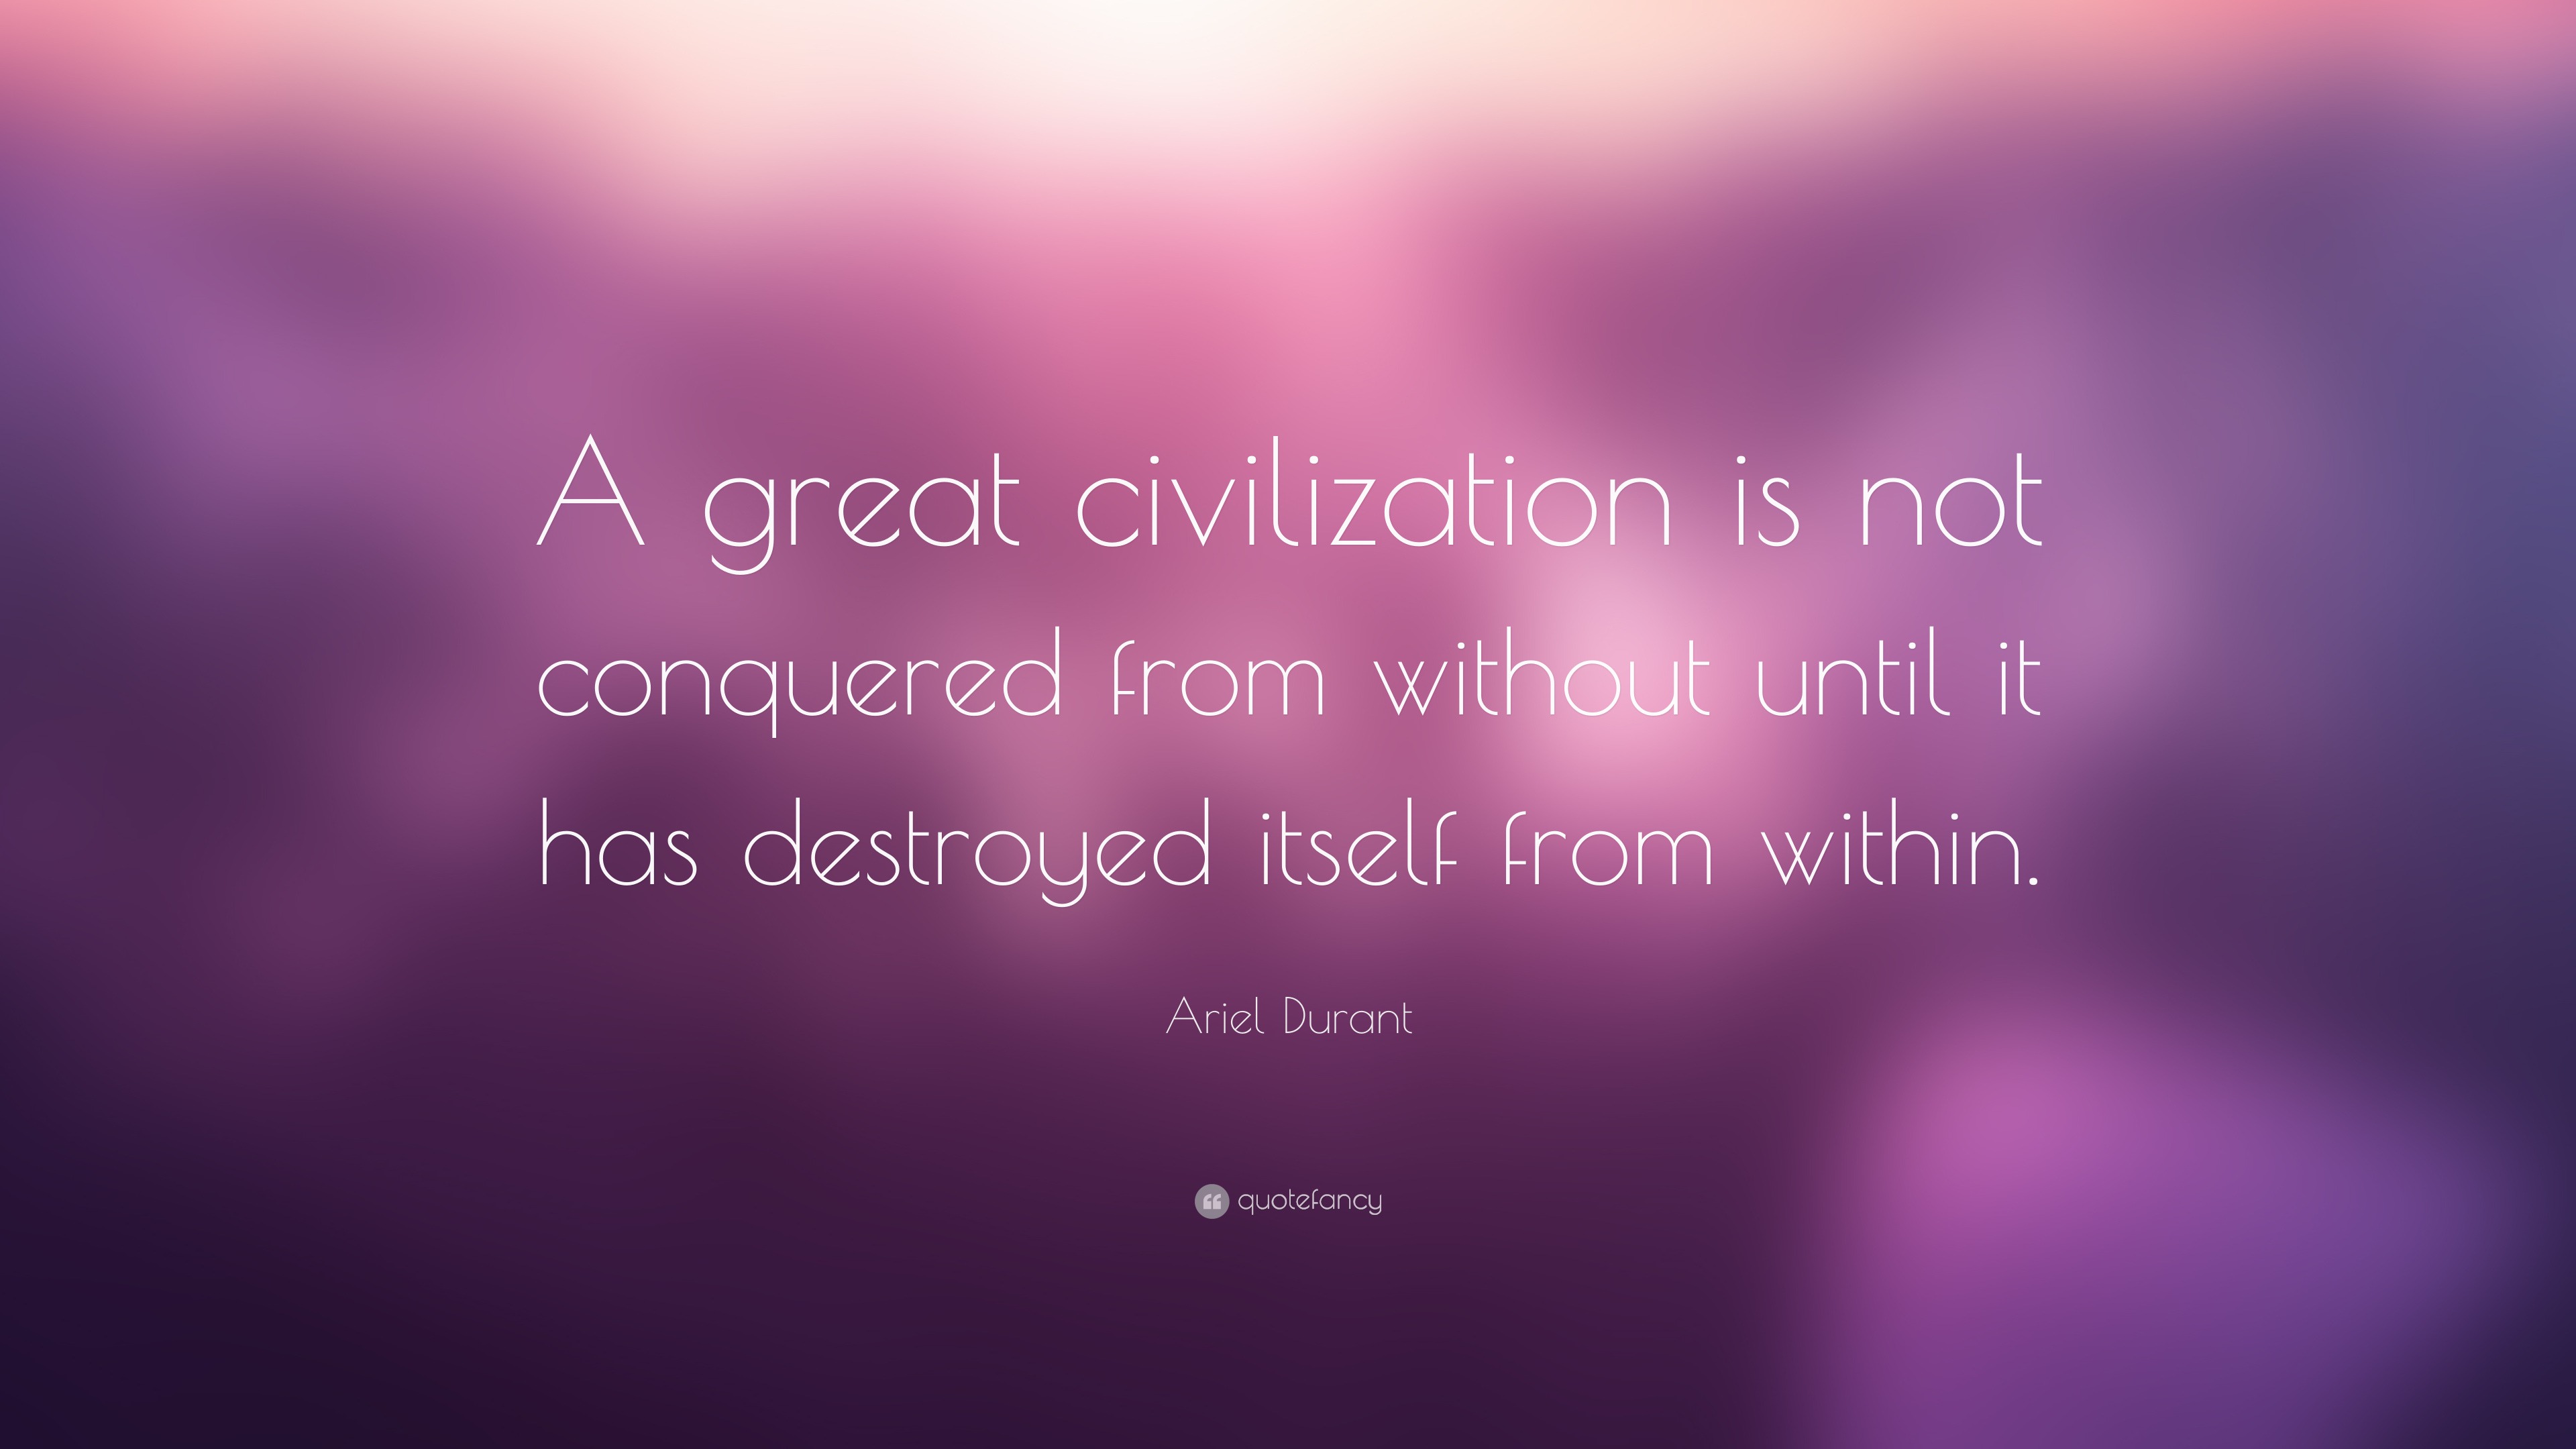 Ariel Durant Quote: “A great civilization is not conquered from without ...